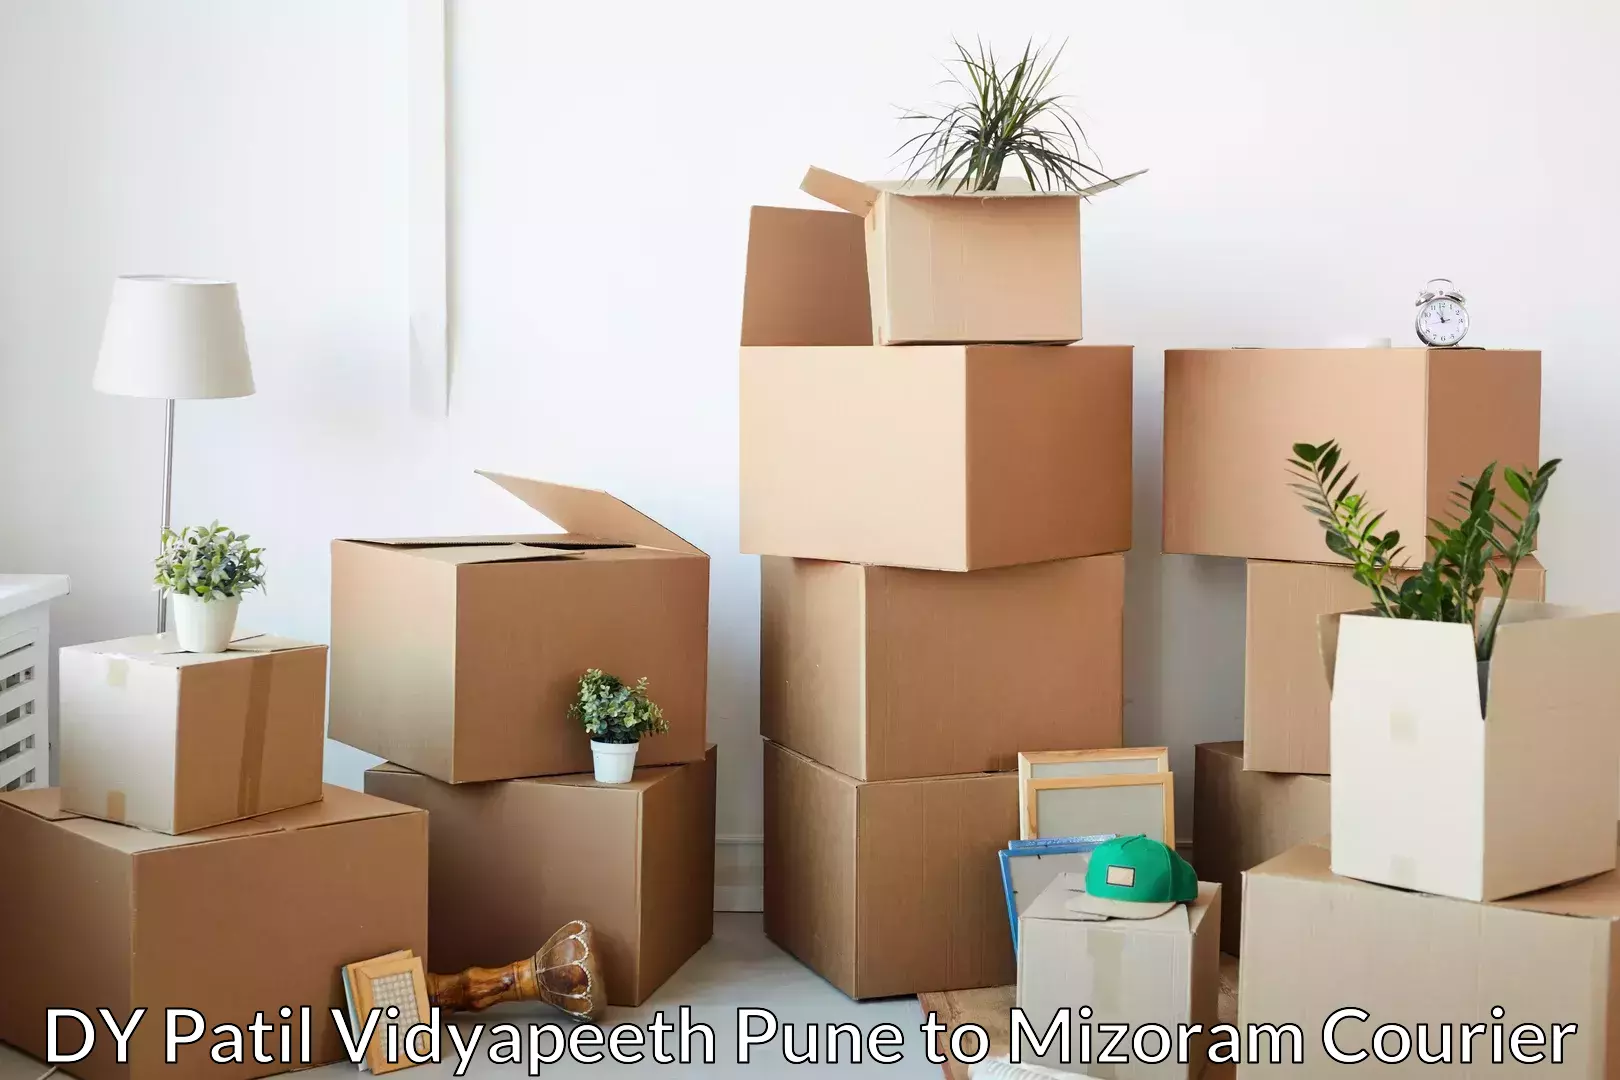 Home relocation experts in DY Patil Vidyapeeth Pune to Darlawn